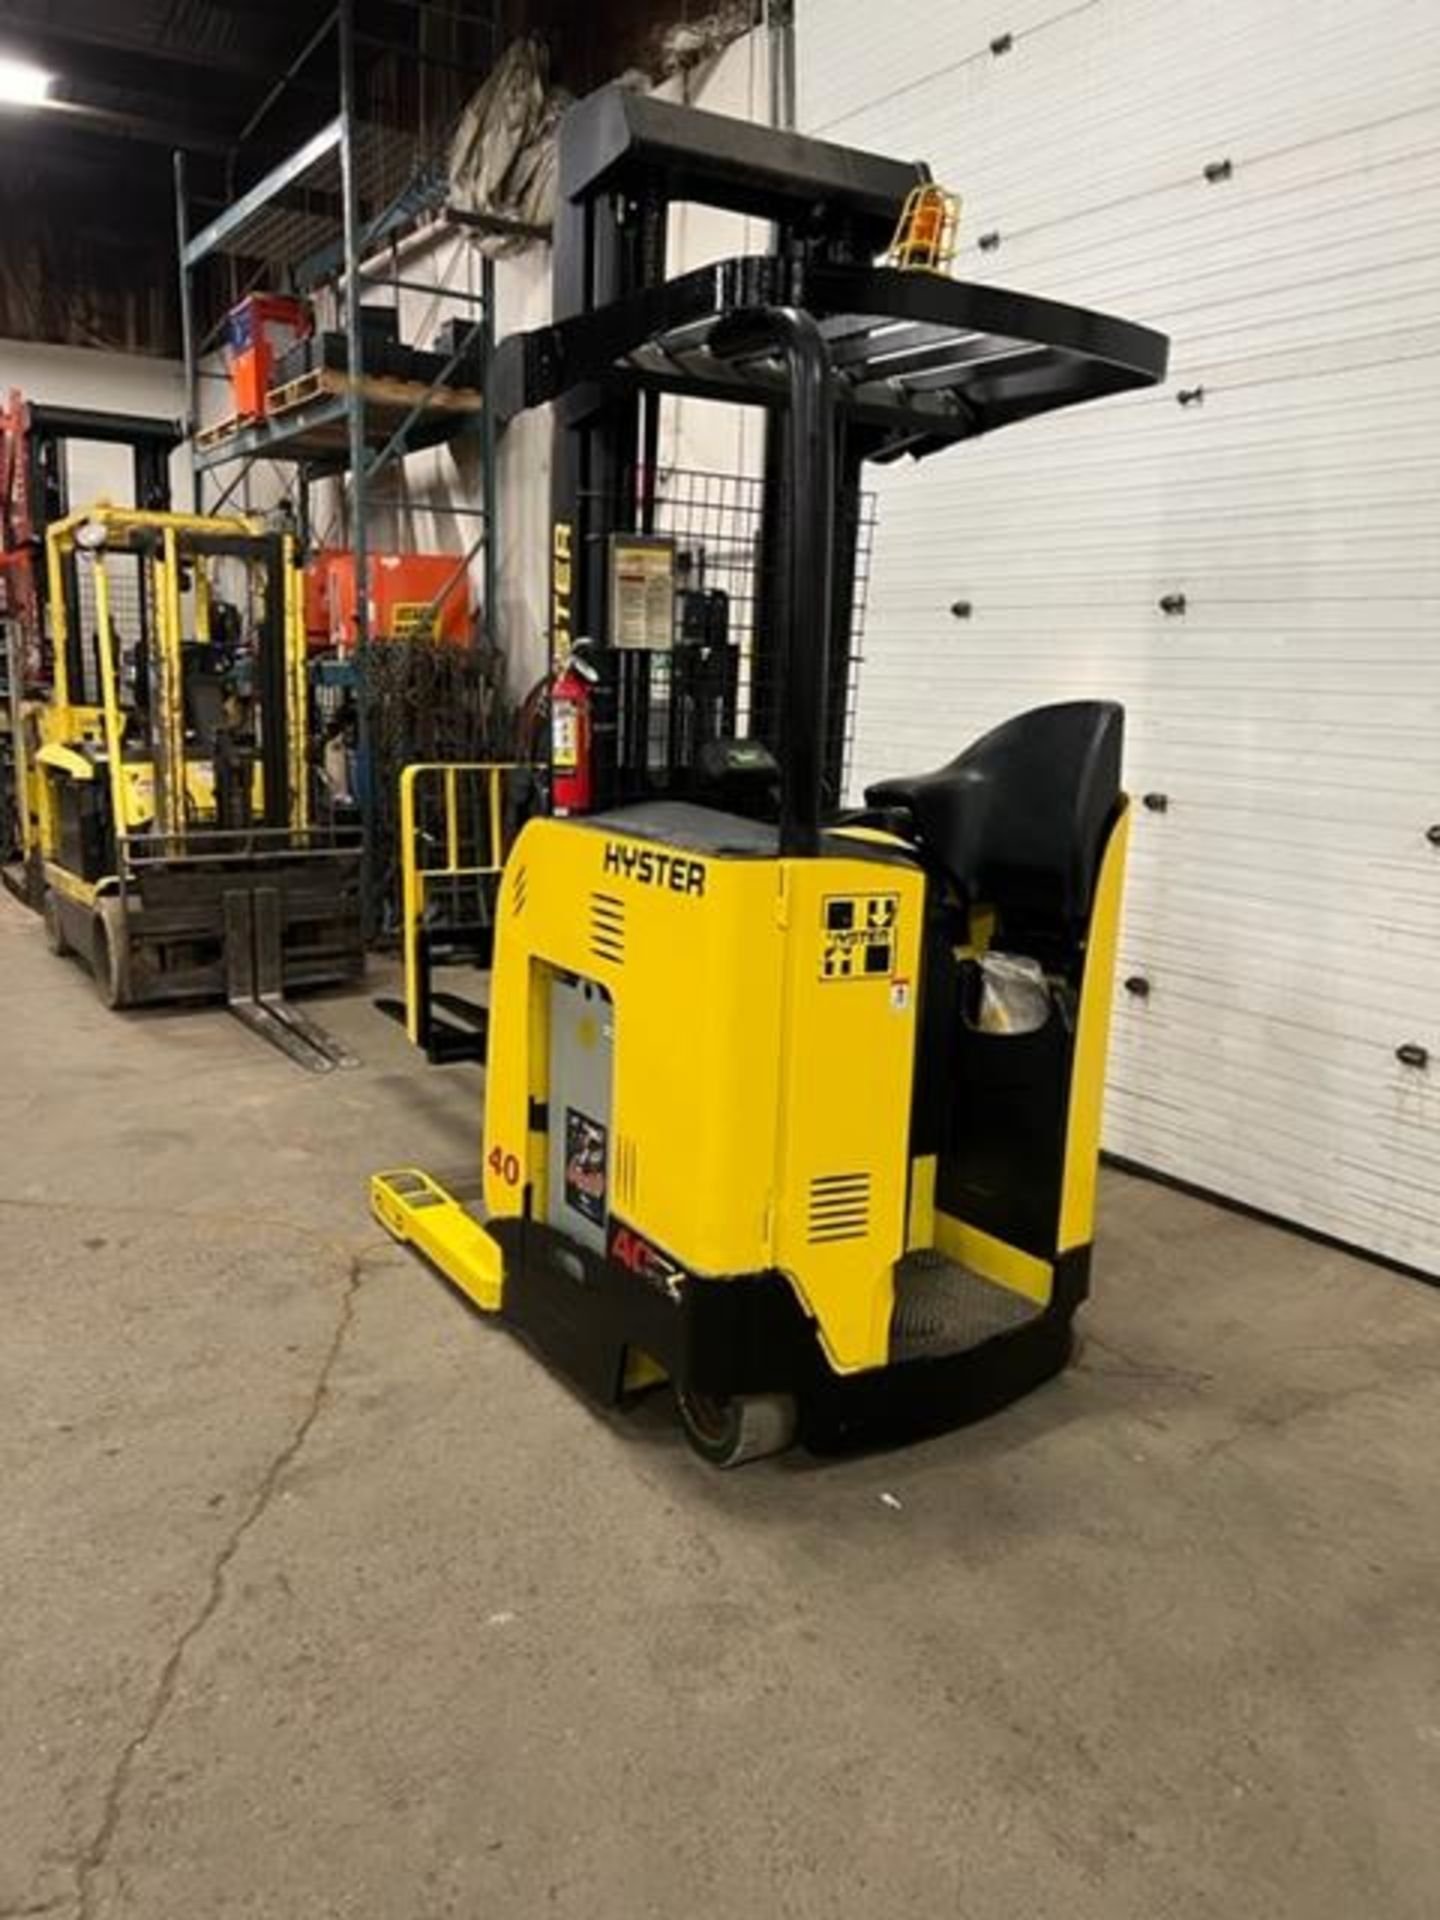 FREE CUSTOMS - 2011 Hyster Reach Truck Pallet Lifter REACH TRUCK 4000lbs capacity electric NICE - Image 3 of 3